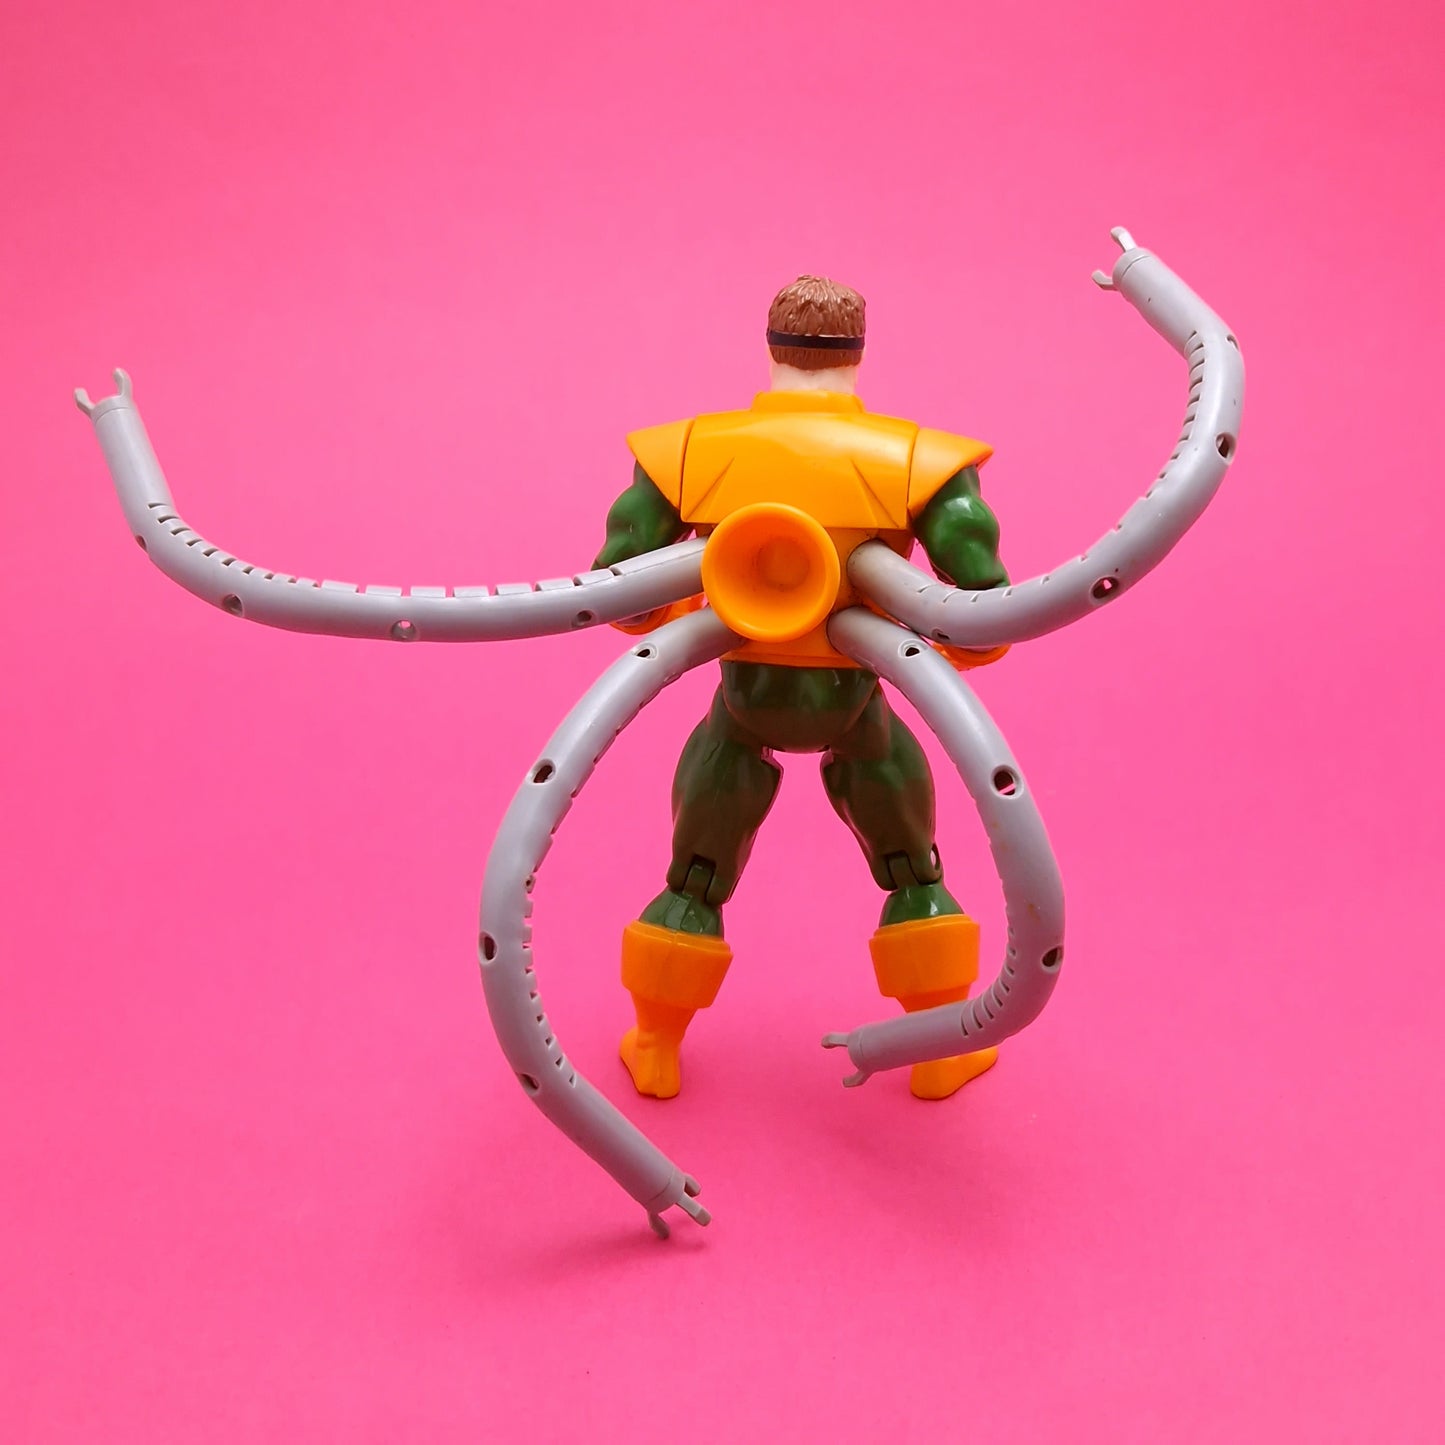 SPIDER-MAN ANIMATED SERIES ☆ DR. OCTOPUS Action Figure ☆ Marvel Loose Toybiz 90s